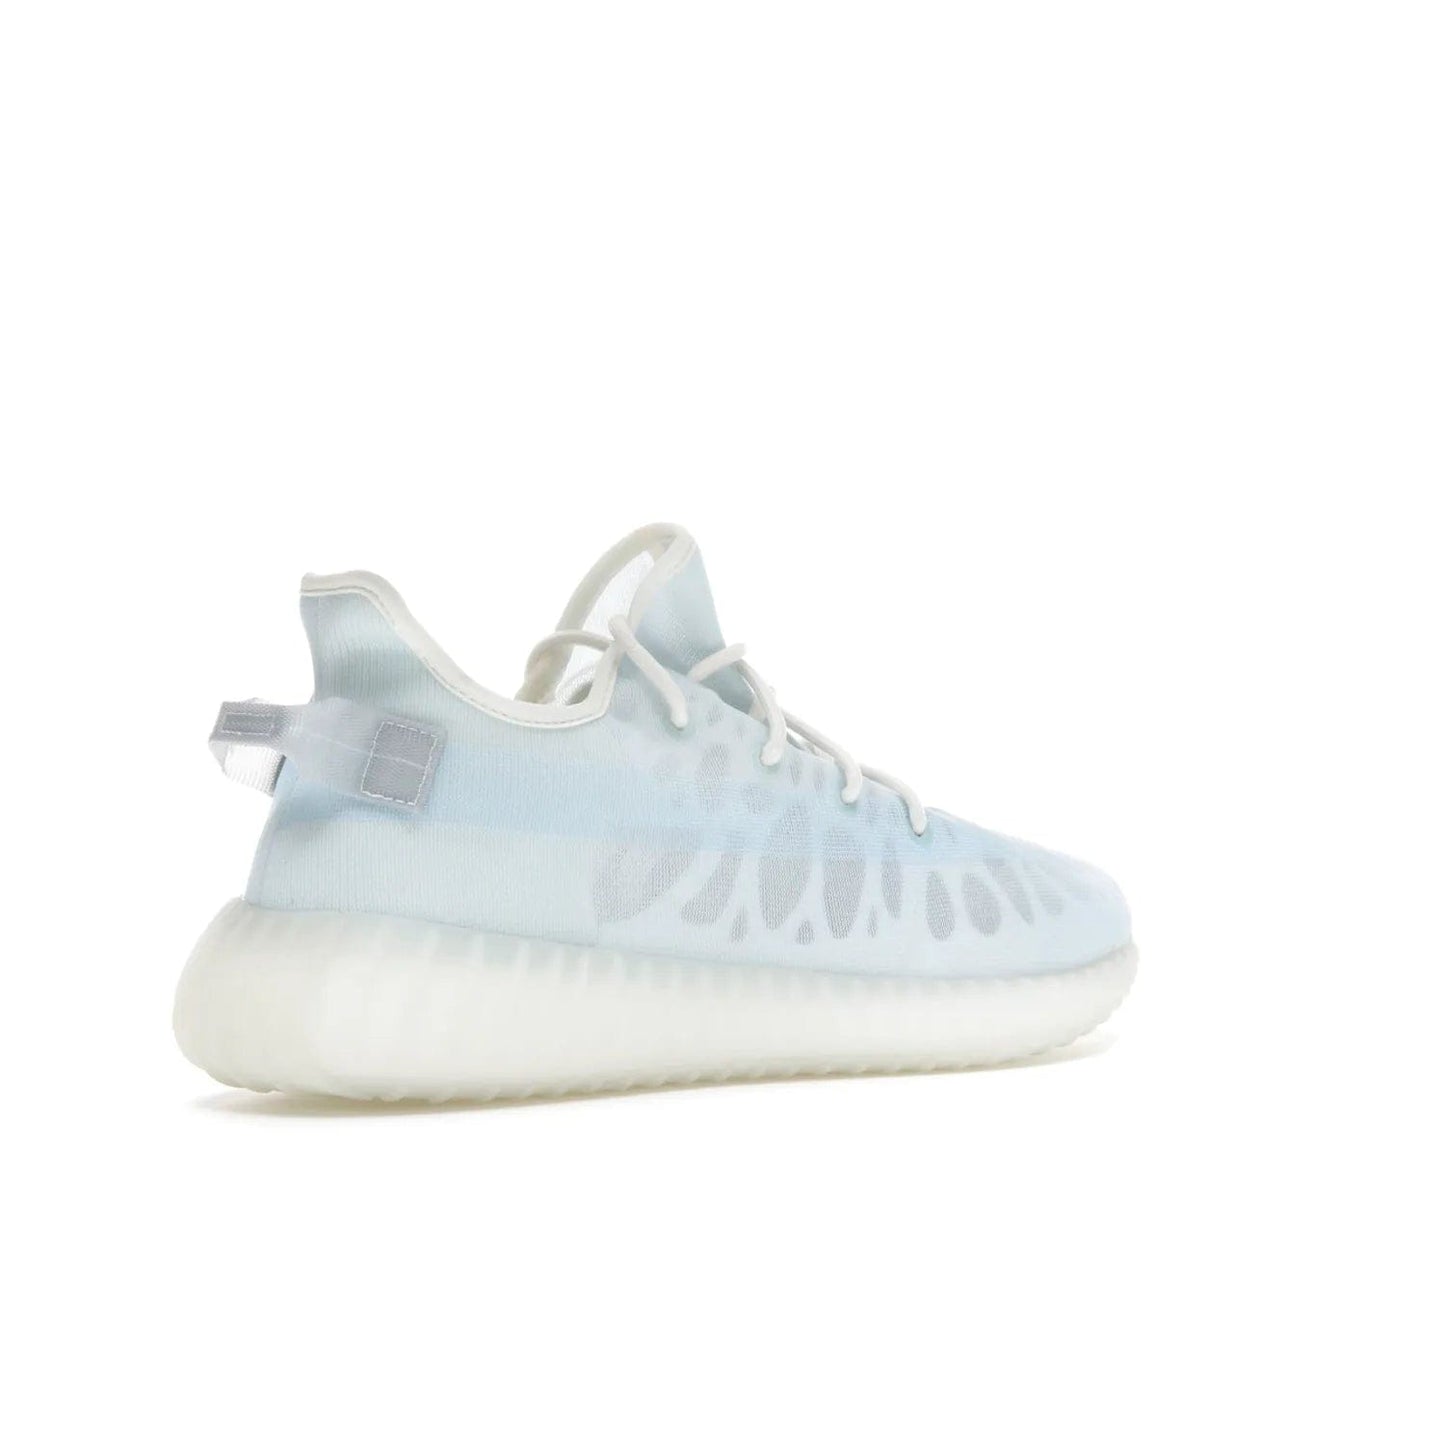 adidas Yeezy Boost 350 V2 Mono Ice - Image 33 - Only at www.BallersClubKickz.com - Introducing the adidas Yeezy 350 V2 Mono Ice - a sleek monofilament mesh design in Ice blue with Boost sole and heel pull tab. Released exclusively in the US for $220.